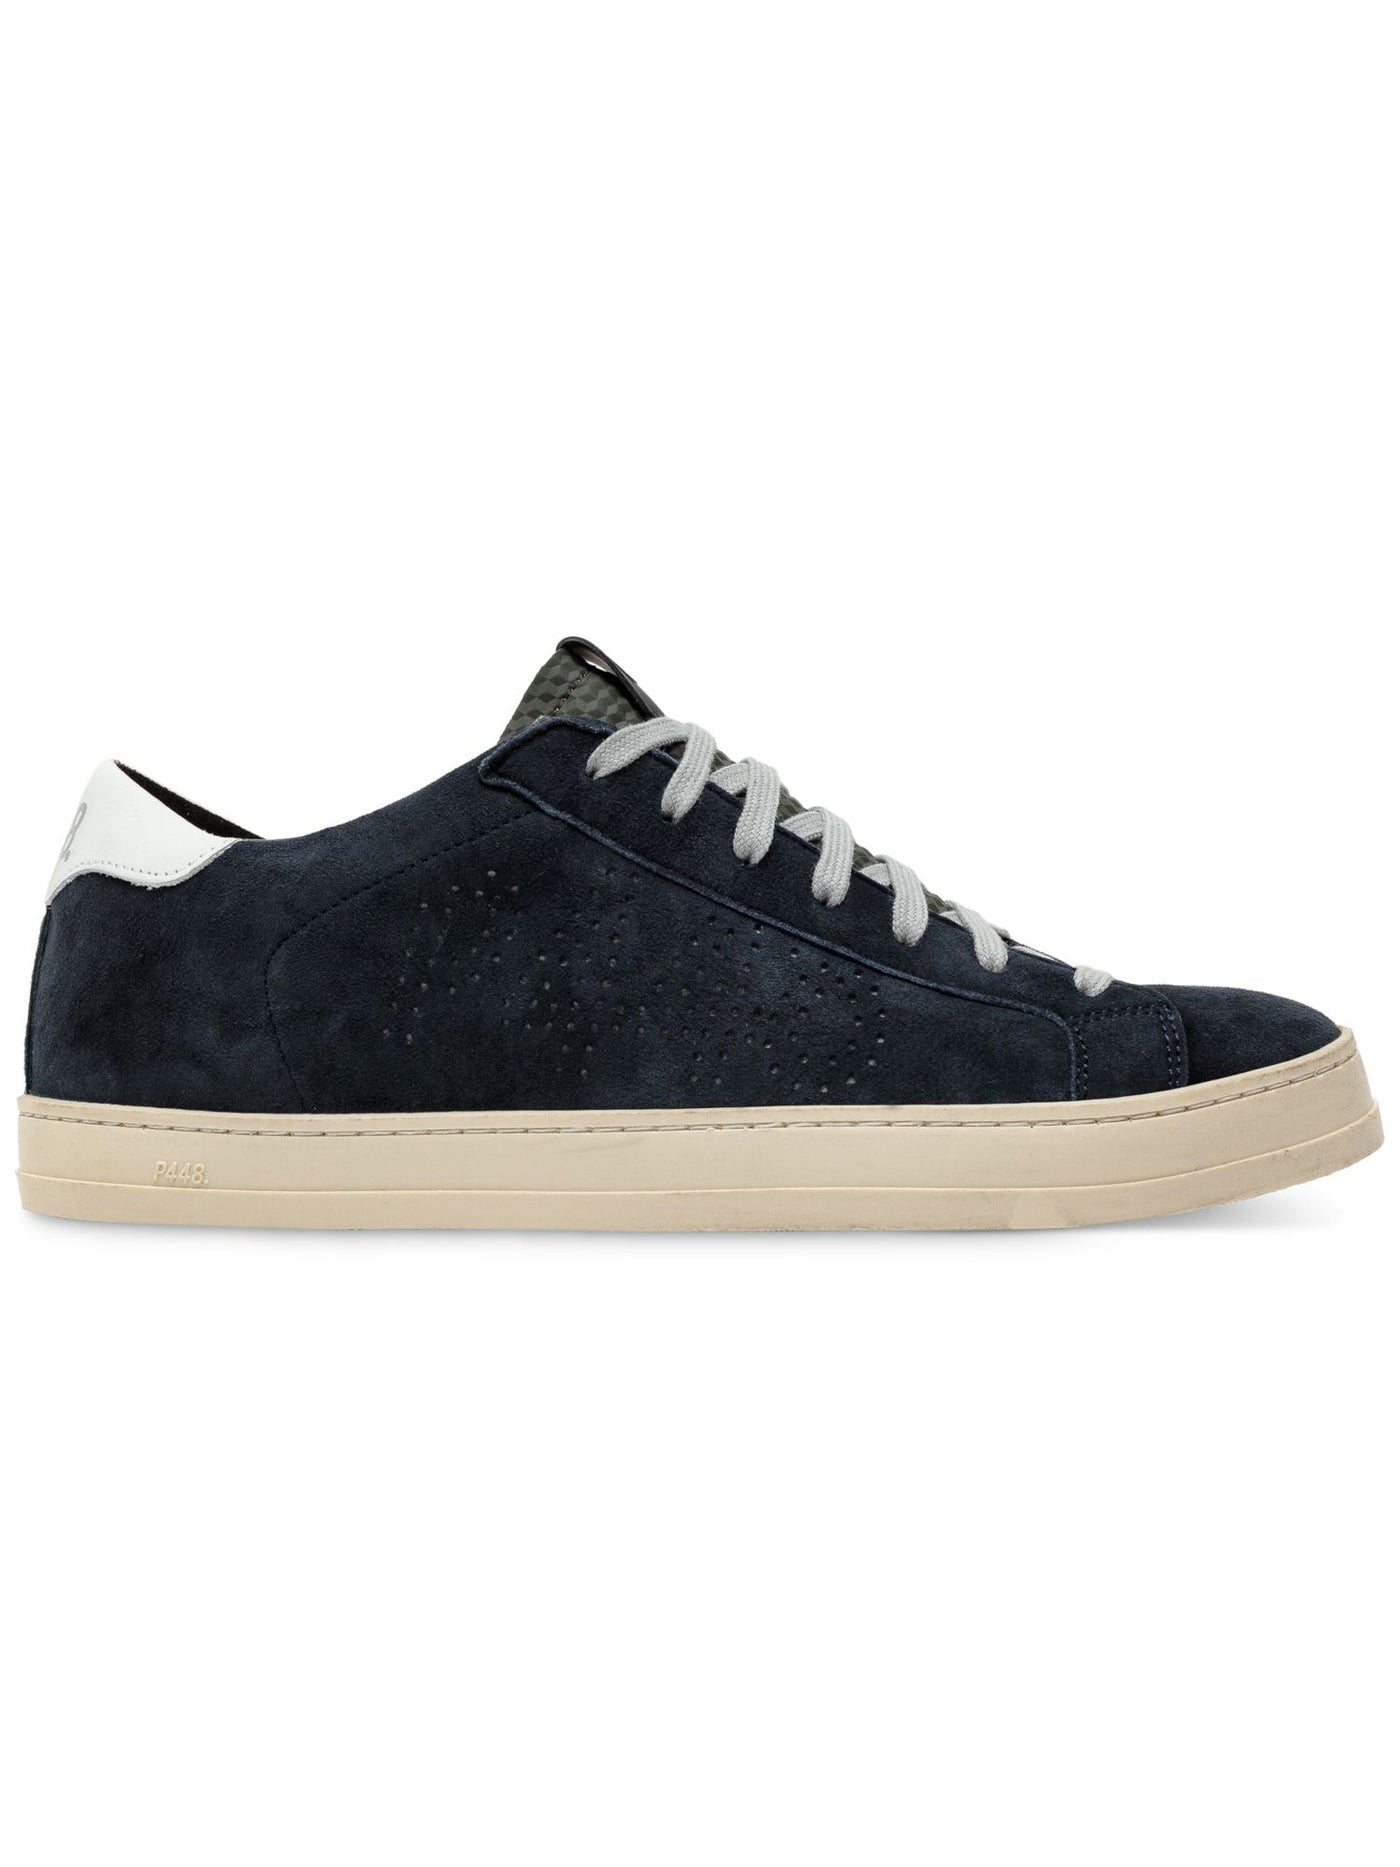 P448 Mens Navy Perforated Padded John Round Toe Platform Lace-Up Leather Sneakers Shoes 46